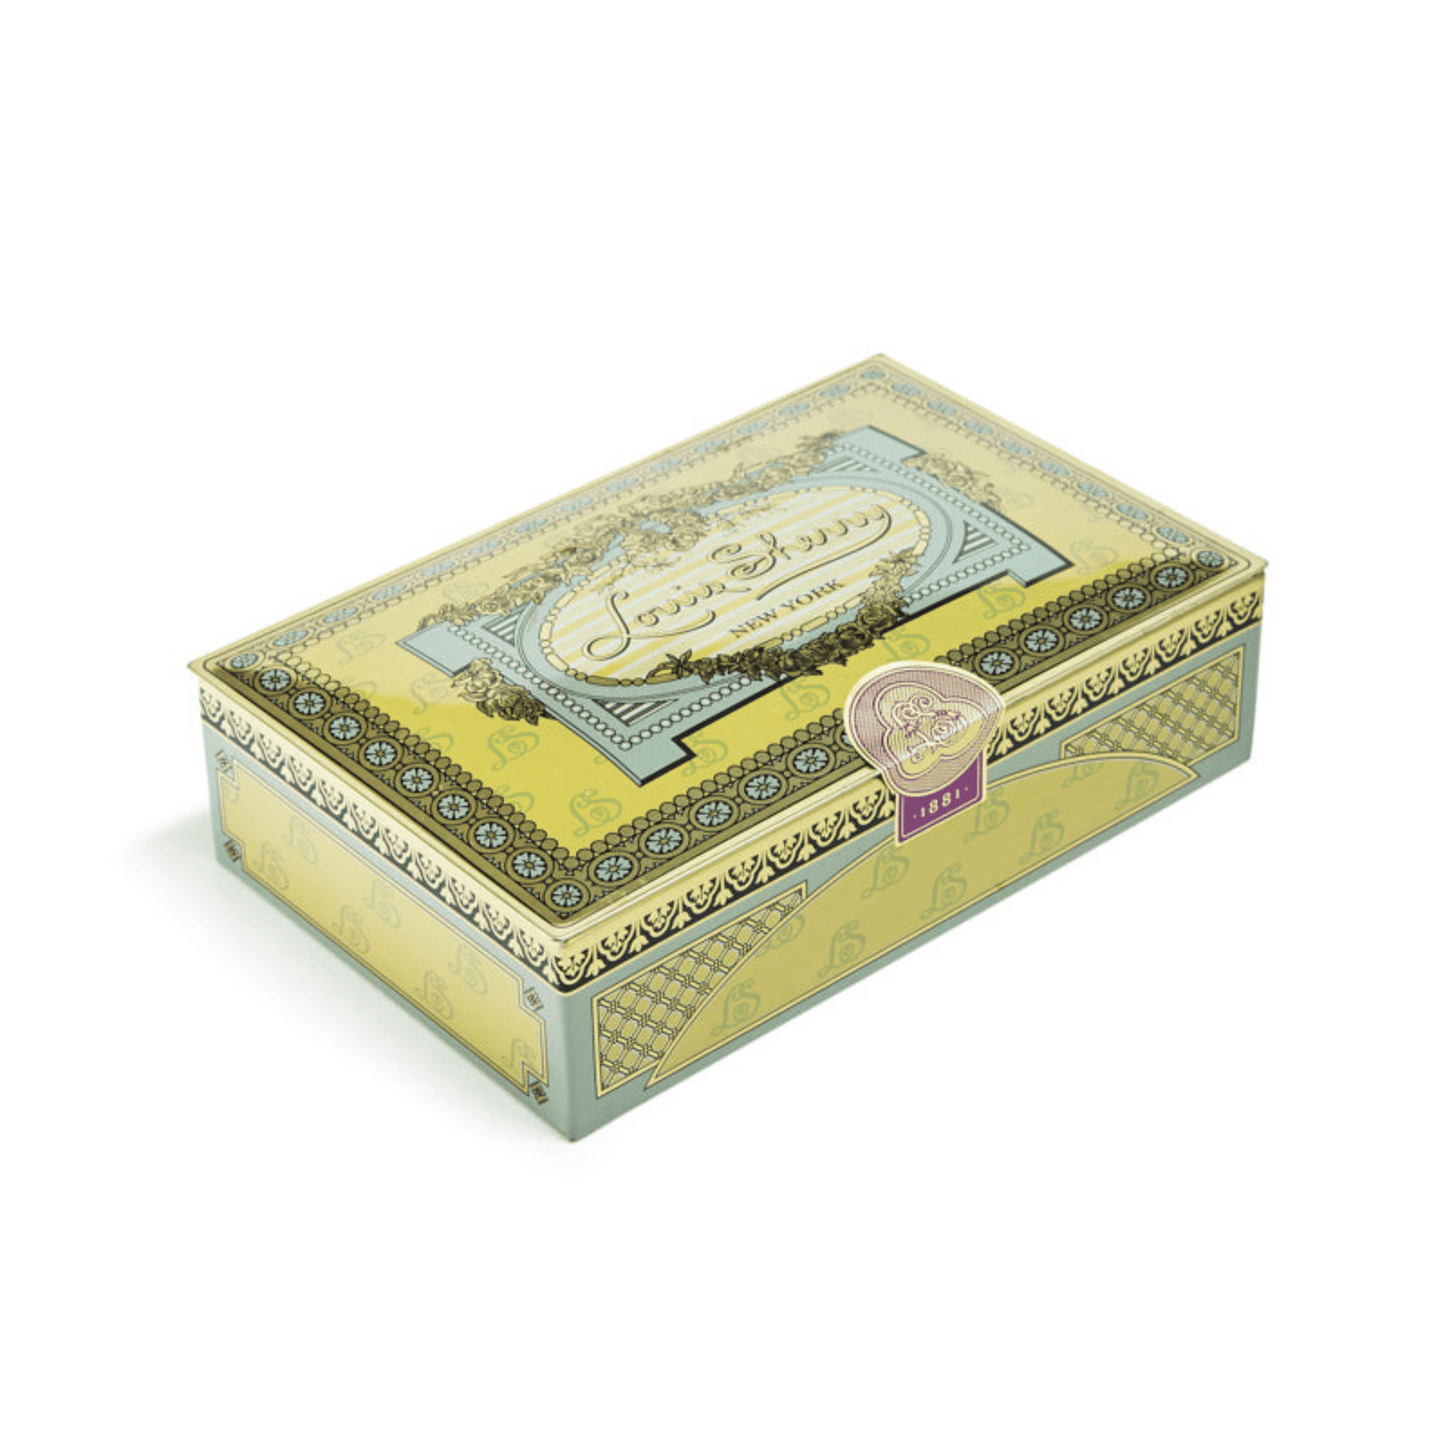 Primary Image of Vintage (Olive Green) Chocolate Tin